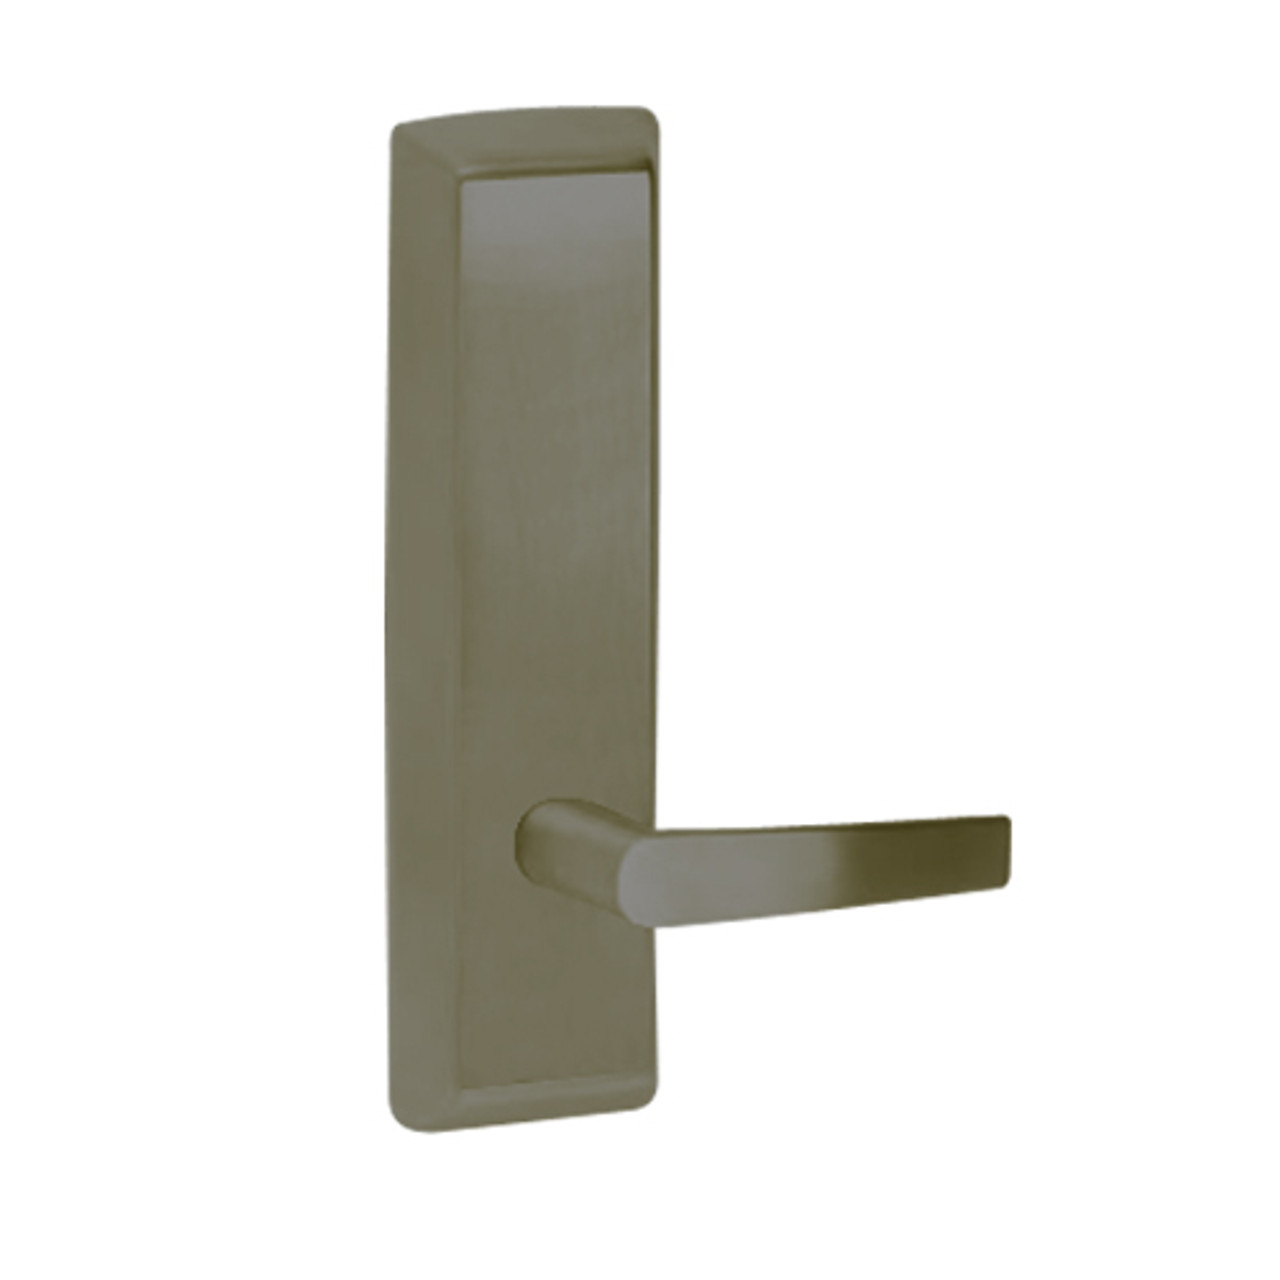 A950-613-RHR Corbin ED5000 Series Exit Device Trim with Dummy Armstrong Lever in Oil Rubbed Bronze Finish